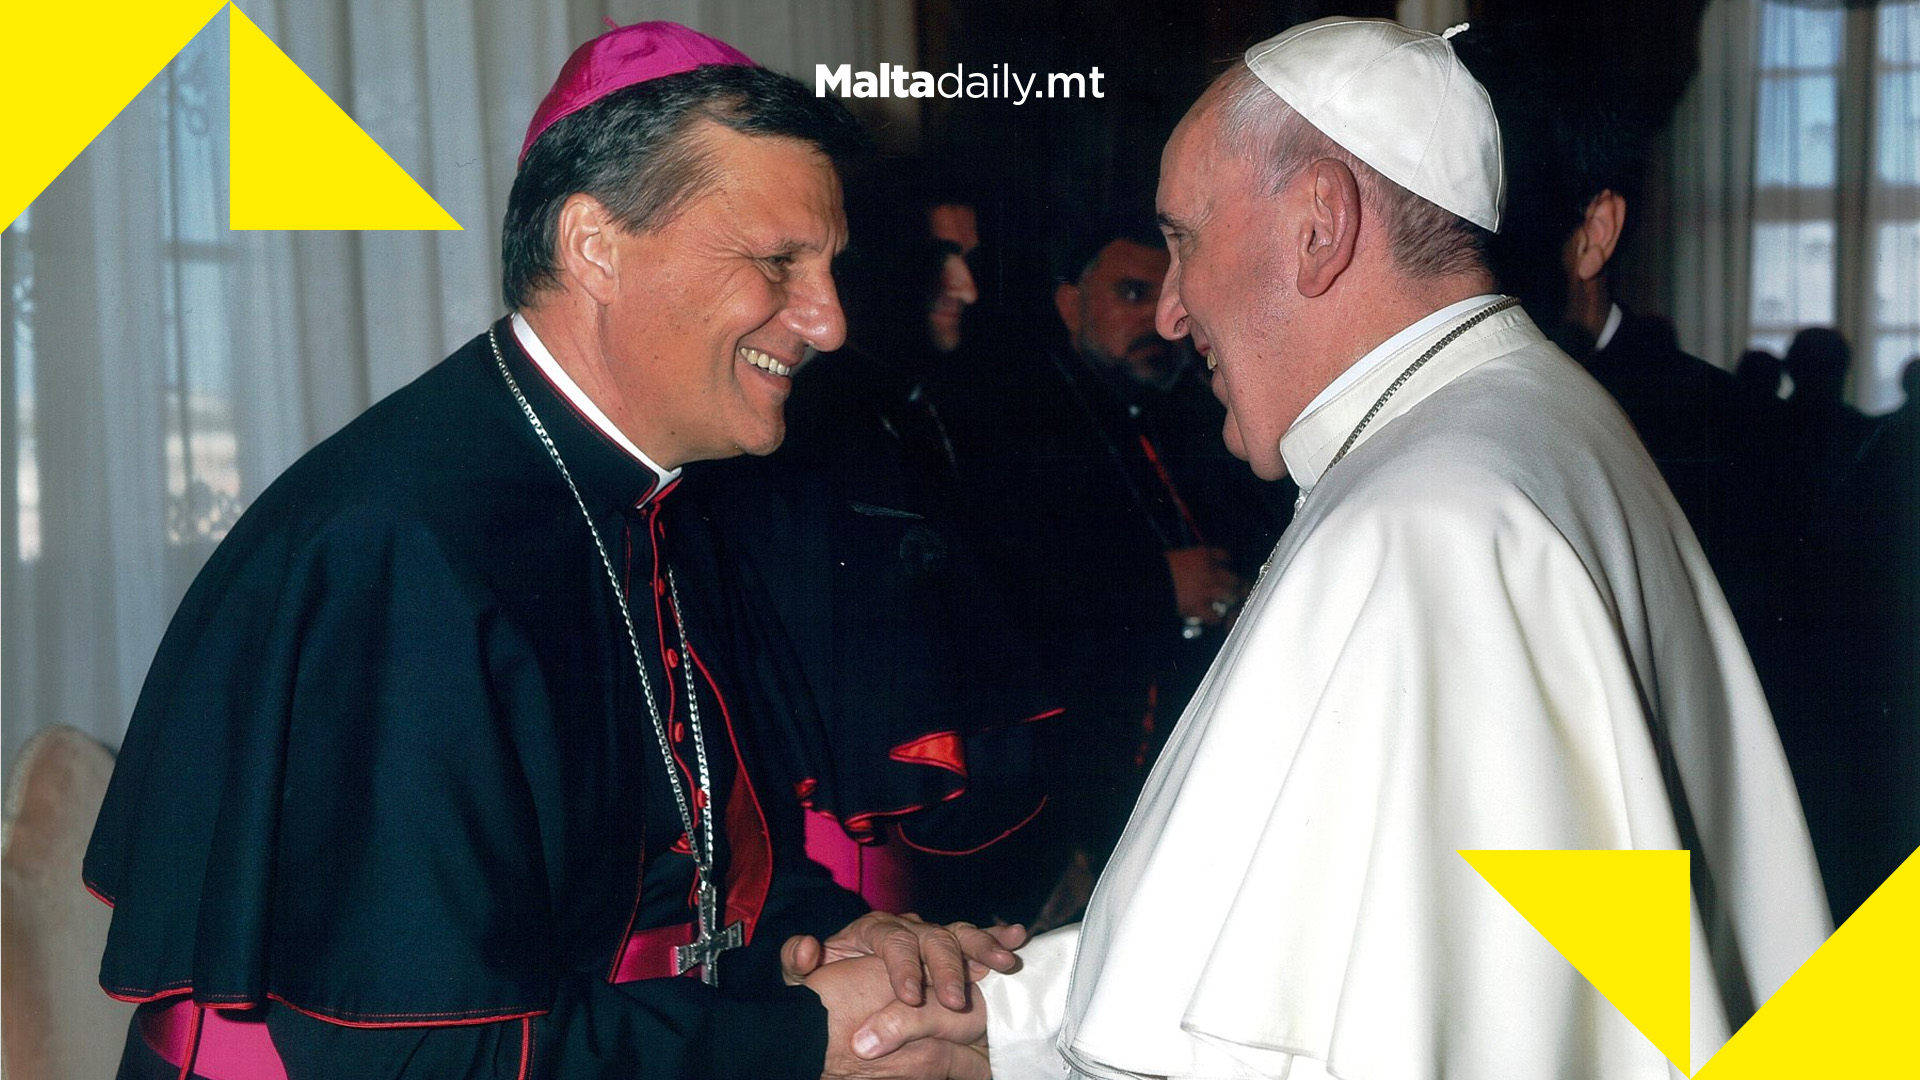 The Maltese Pope? Gozitan cardinal Grech eyed as potential successor to Pope Francis